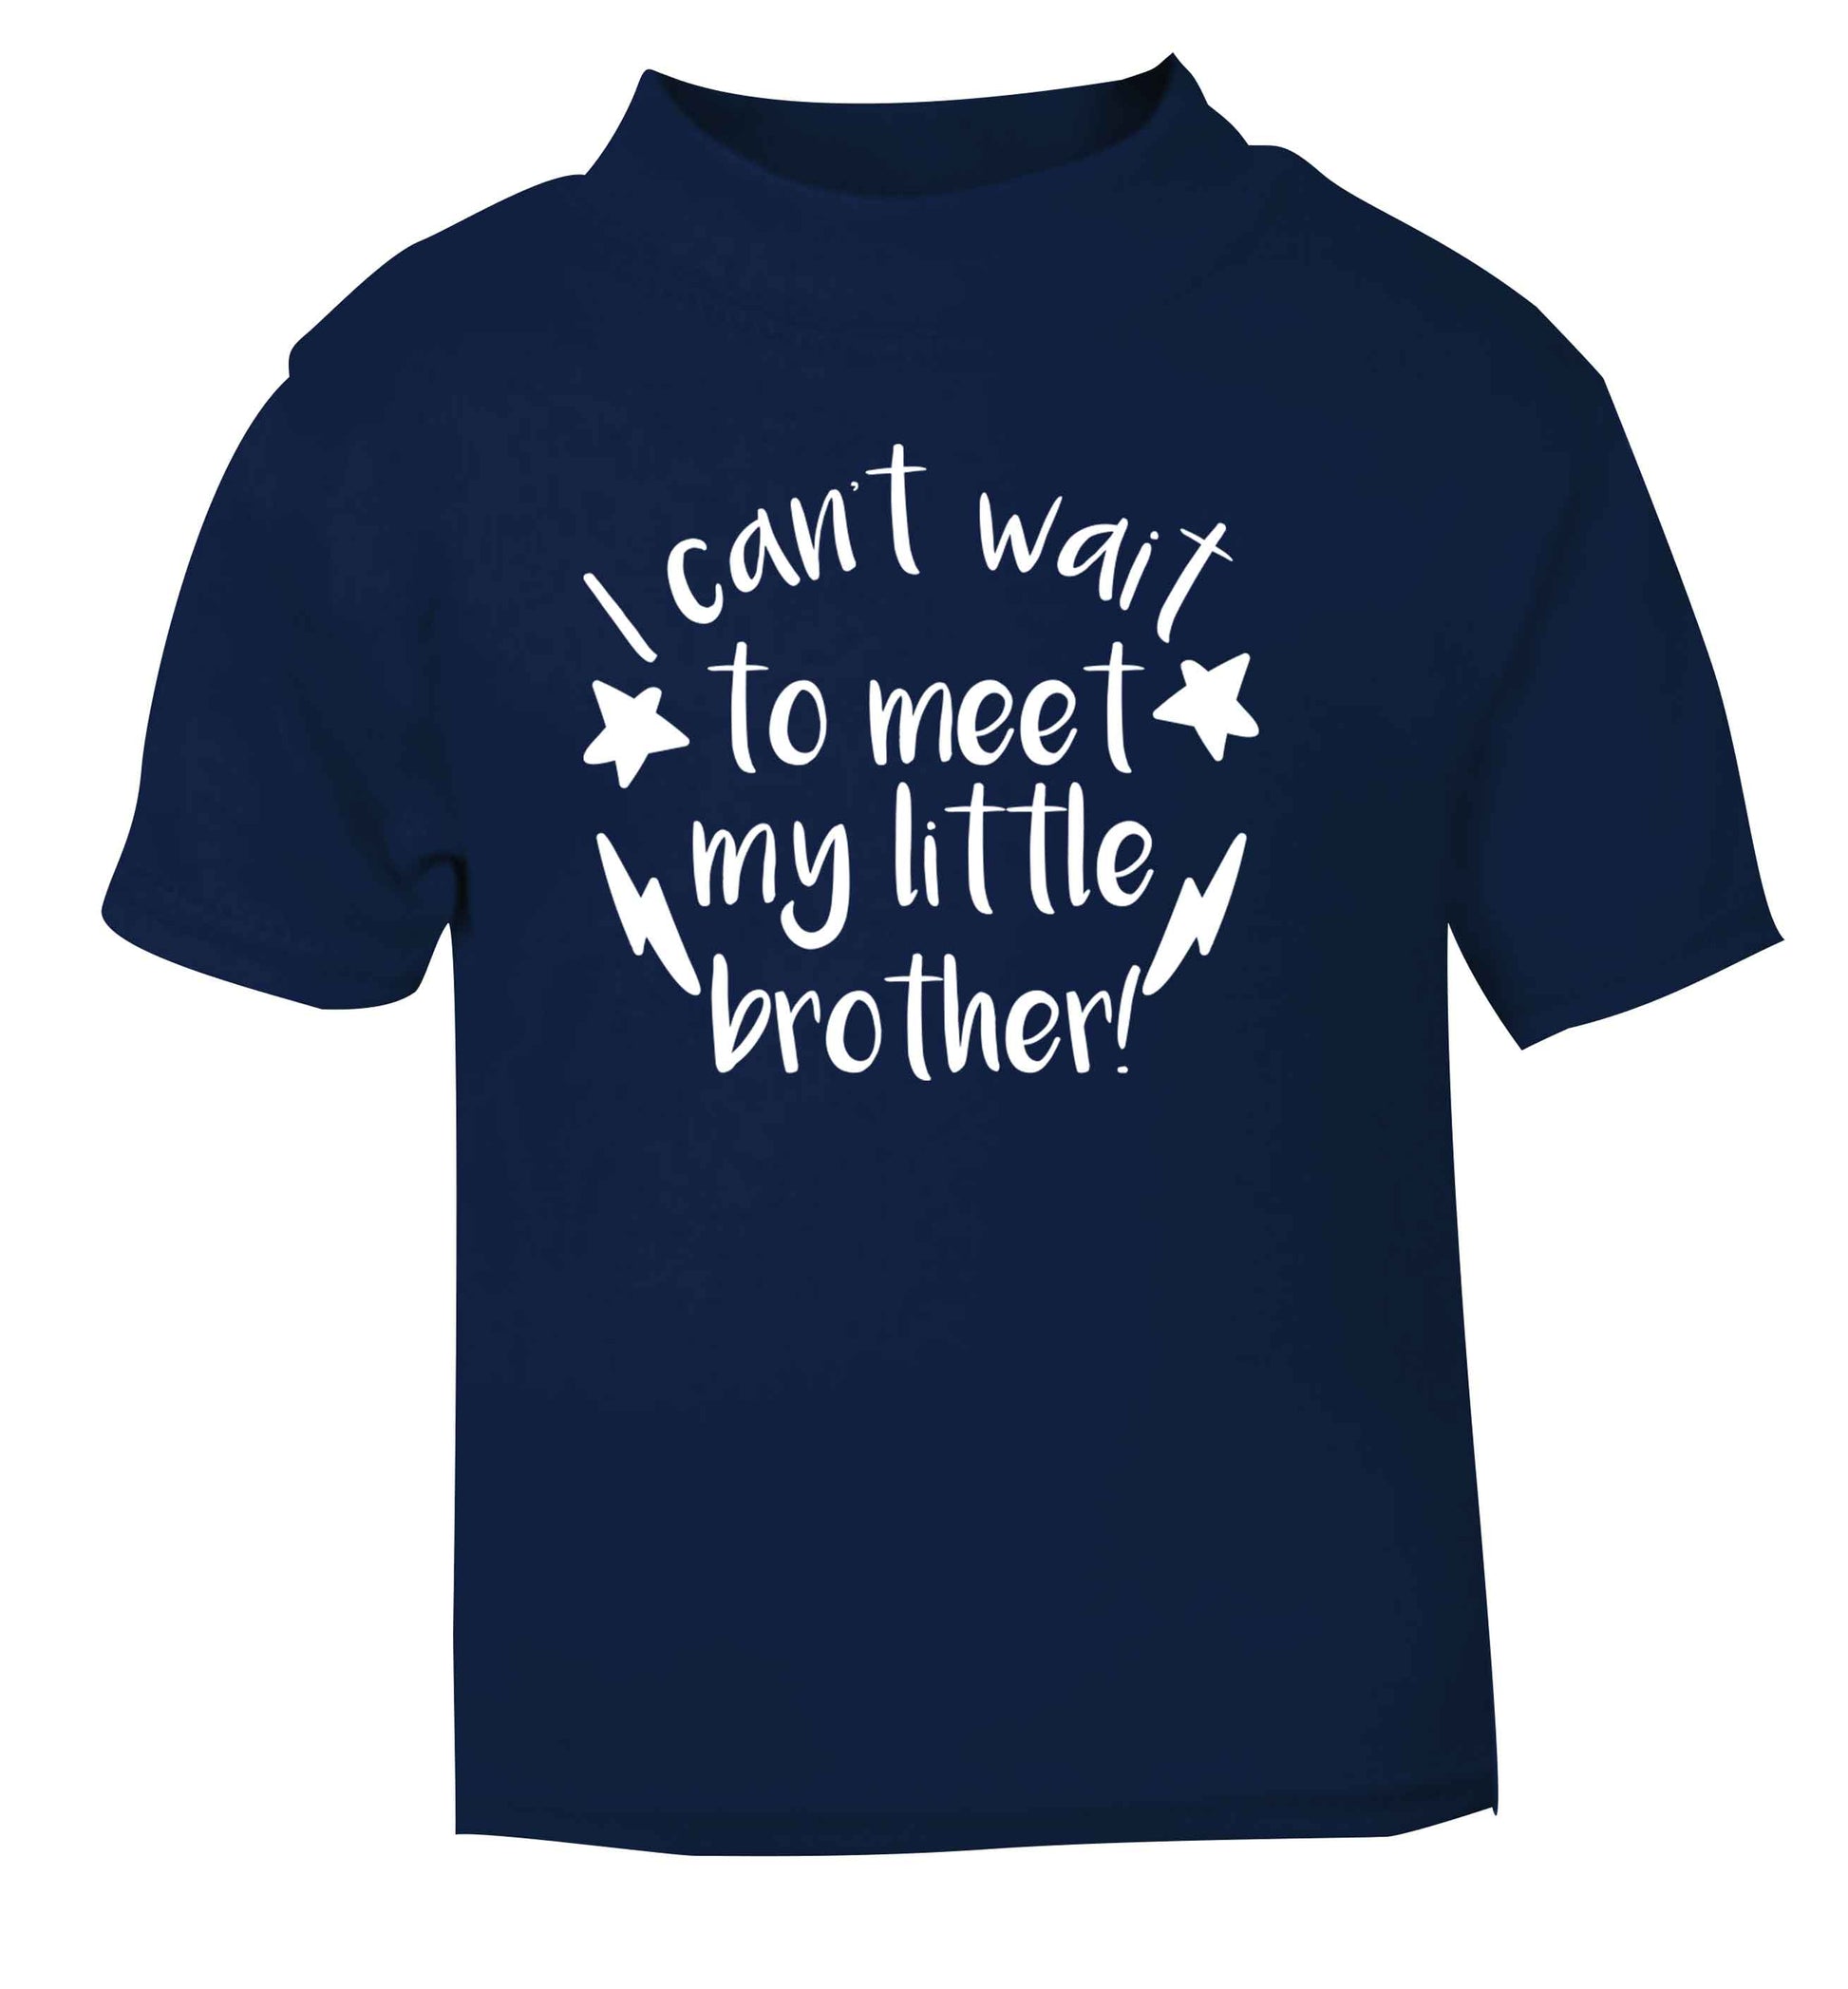 I can't wait to meet my sister! navy Baby Toddler Tshirt 2 Years